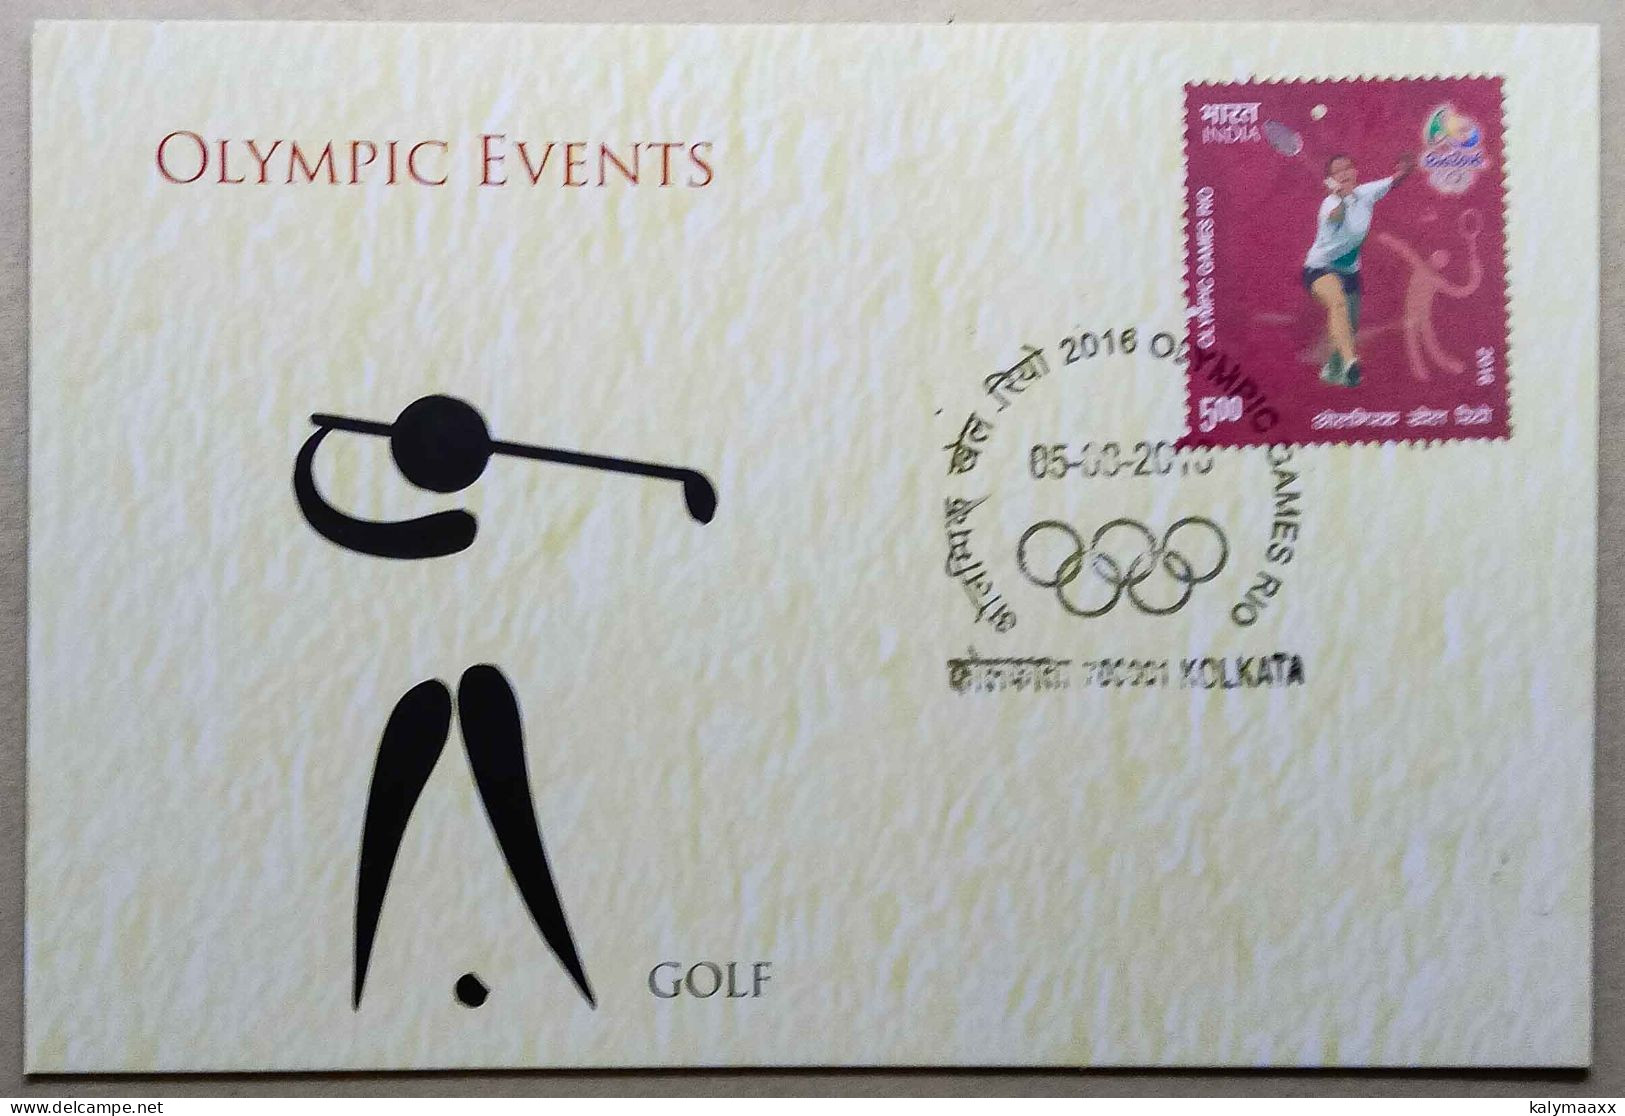 INDIA 2016 OLYMPIC EVENTS, GOLF, INDIA POST ISSUED POSTCARD...RARE - Golf